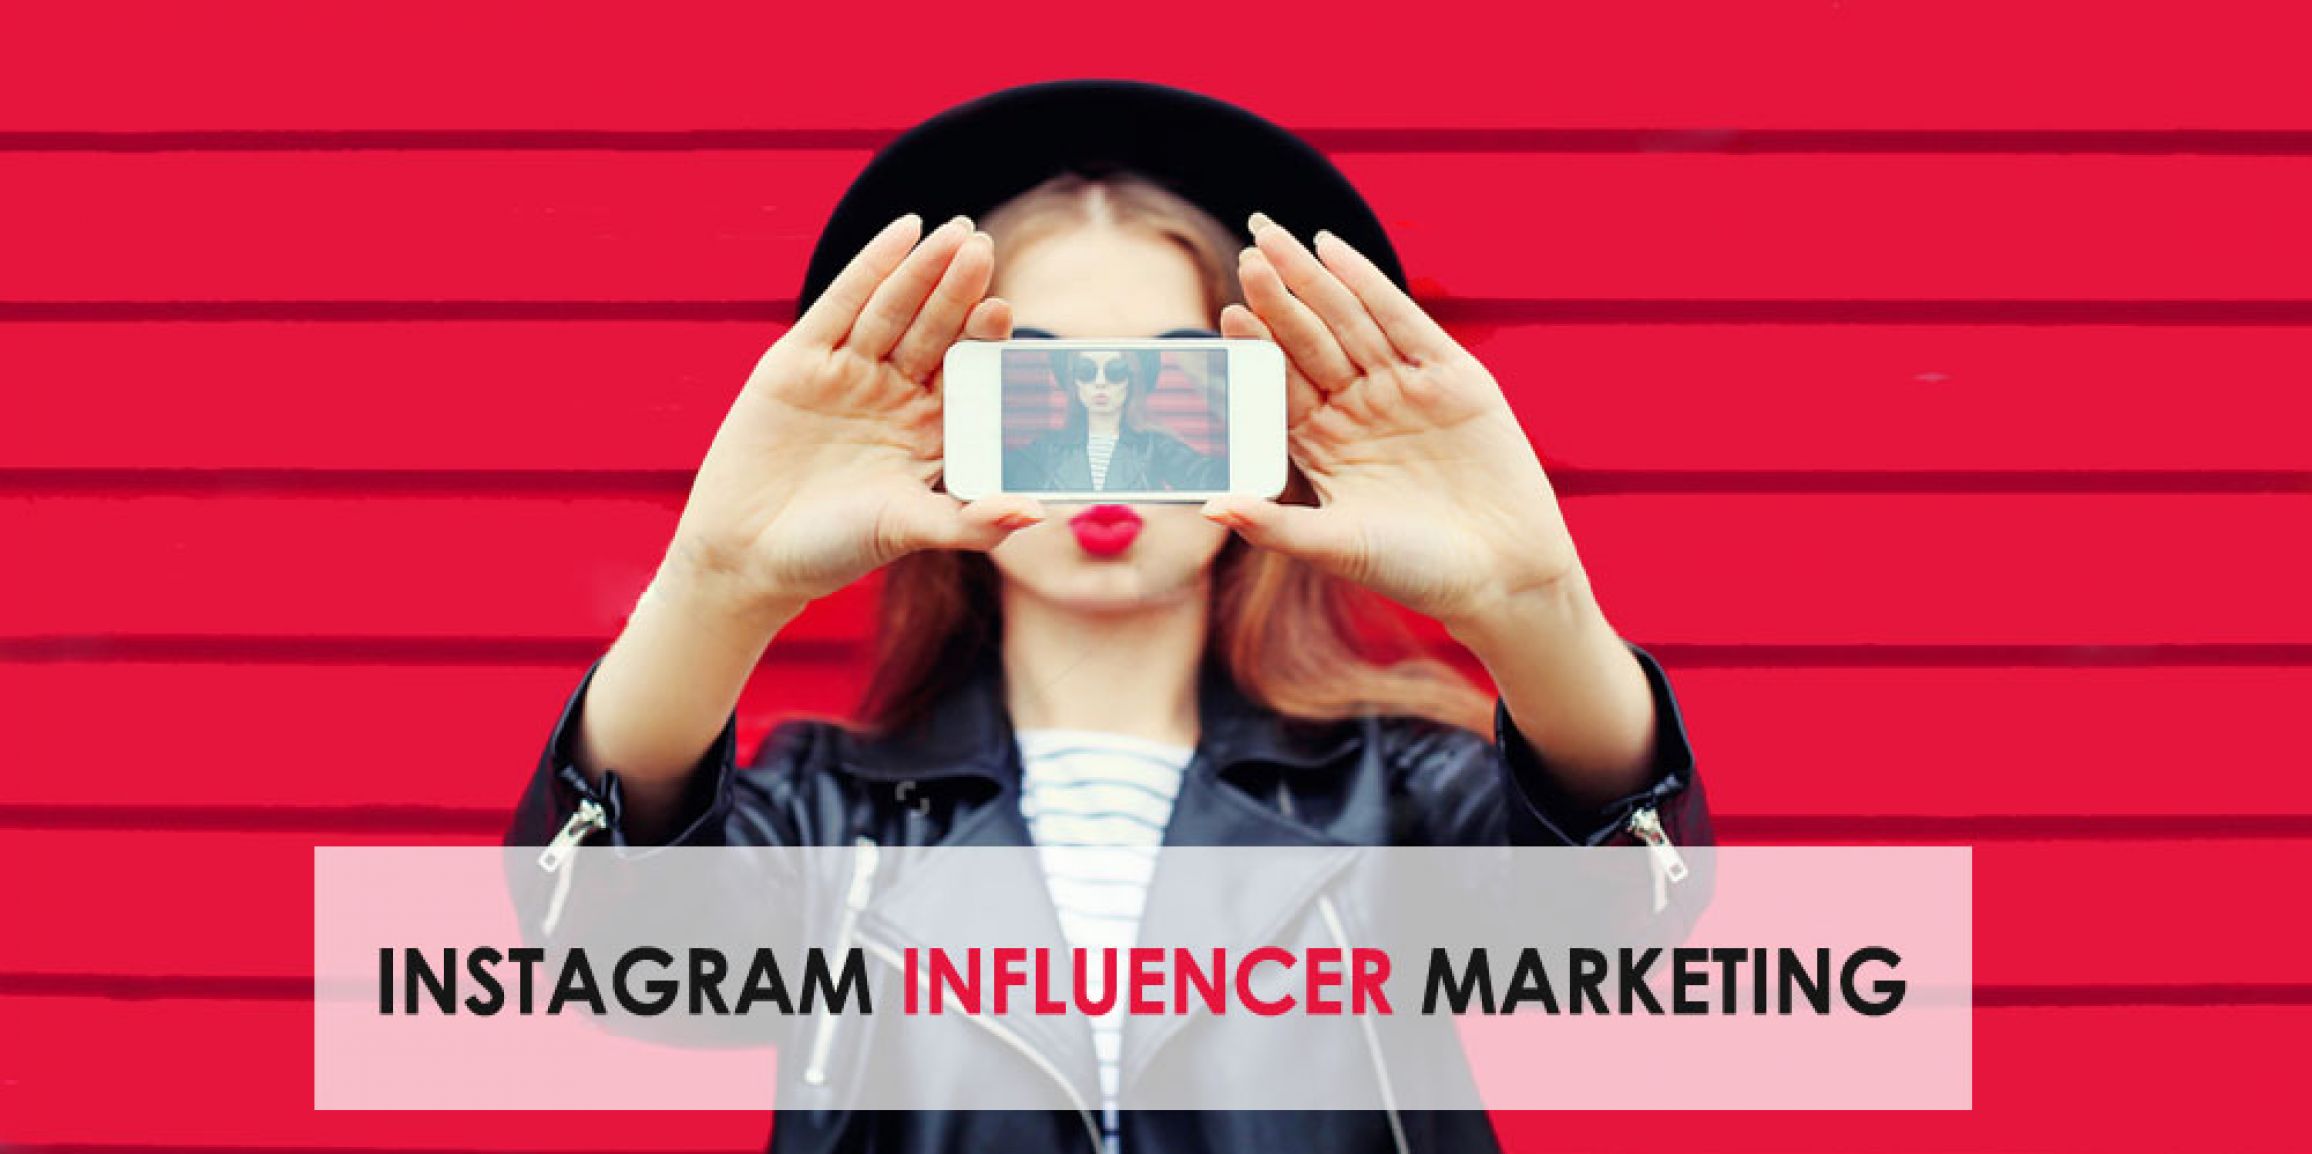 the concept of buy instagram followers has revolutionised the whole instagram influencer platform - instagram follower platforms